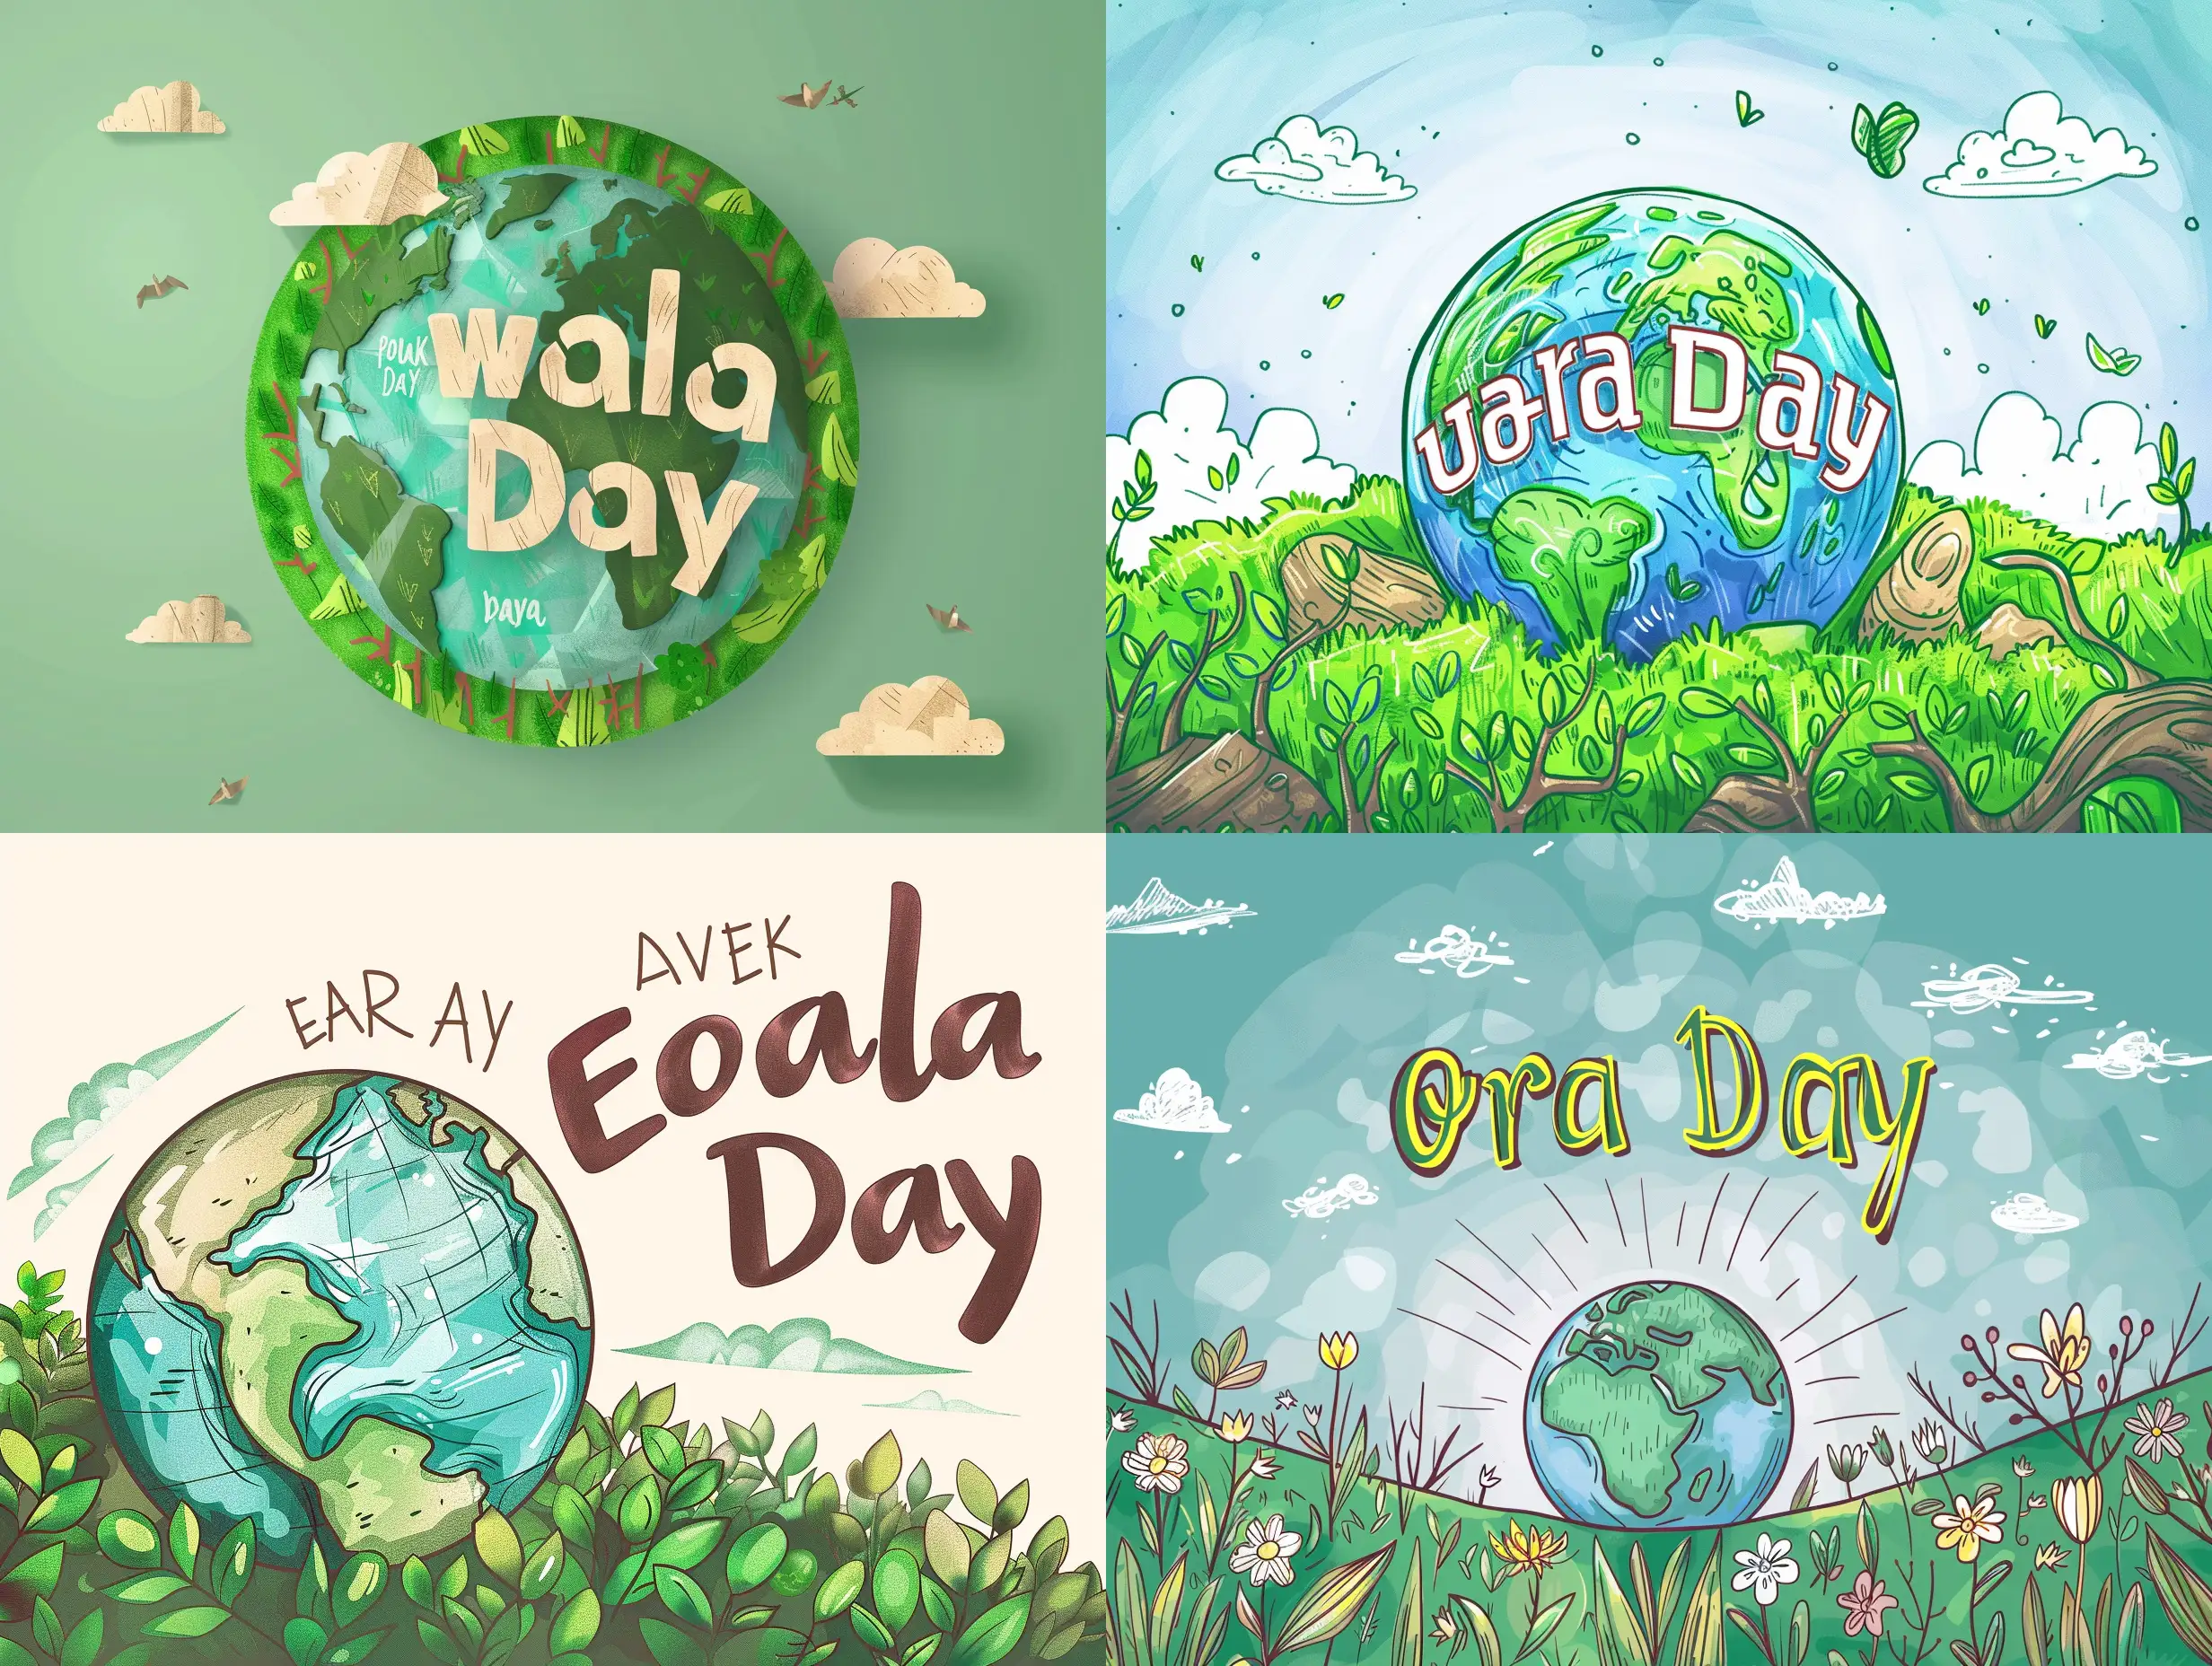 Earth-Day-Celebration-Illustration-with-Text